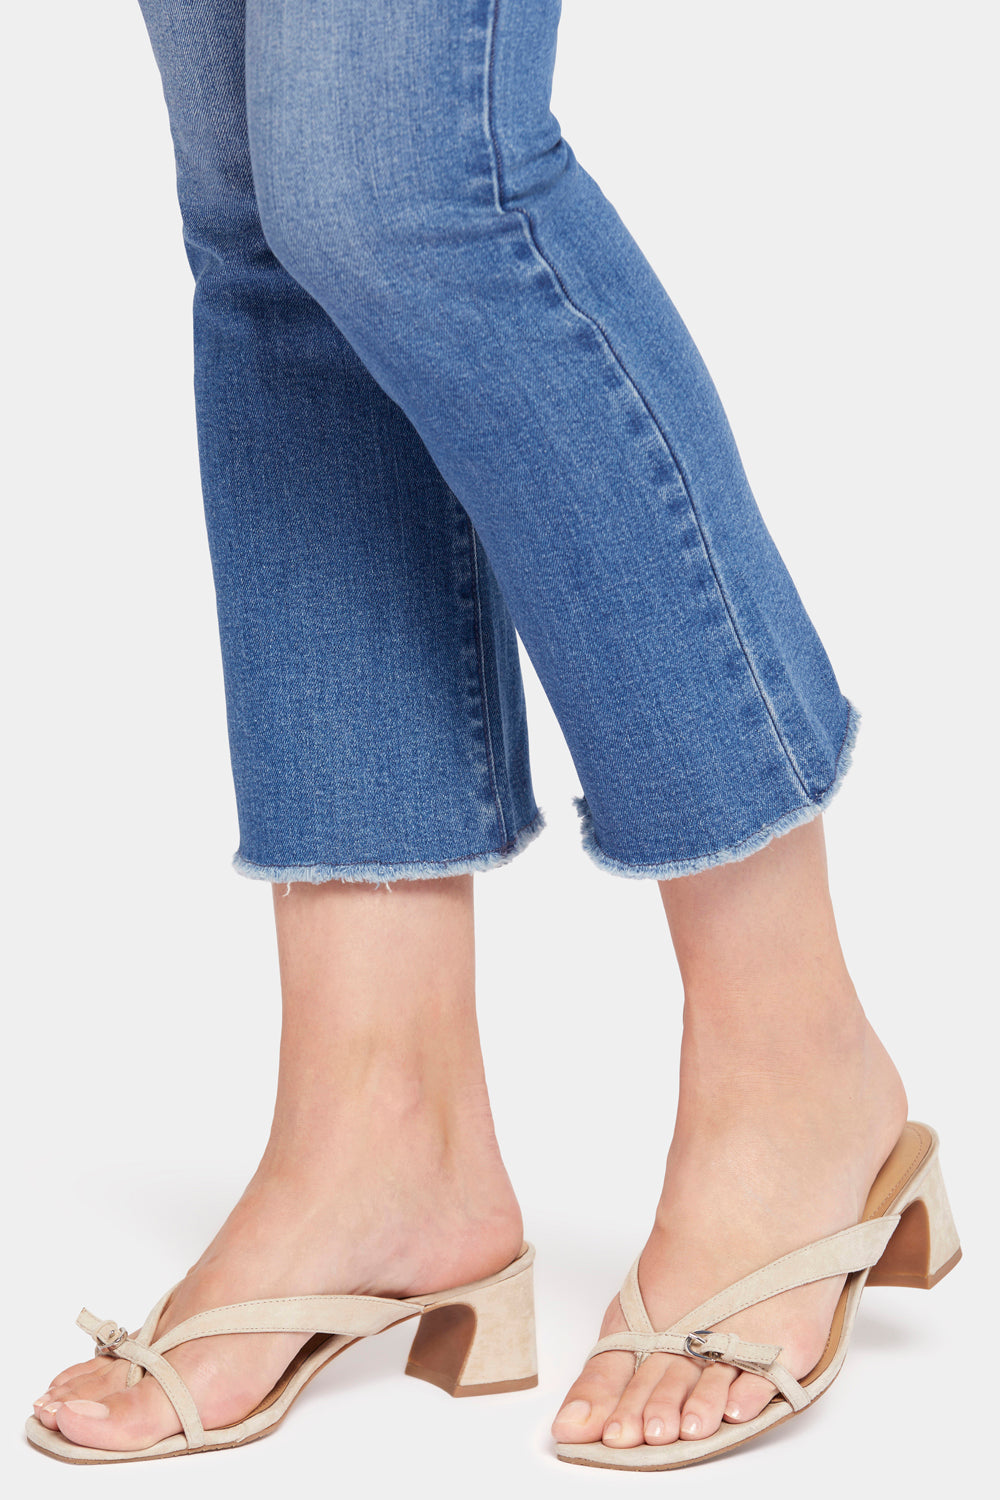 NYDJ Slim Bootcut Ankle Jeans With High Rise And Frayed Hems - Heartland